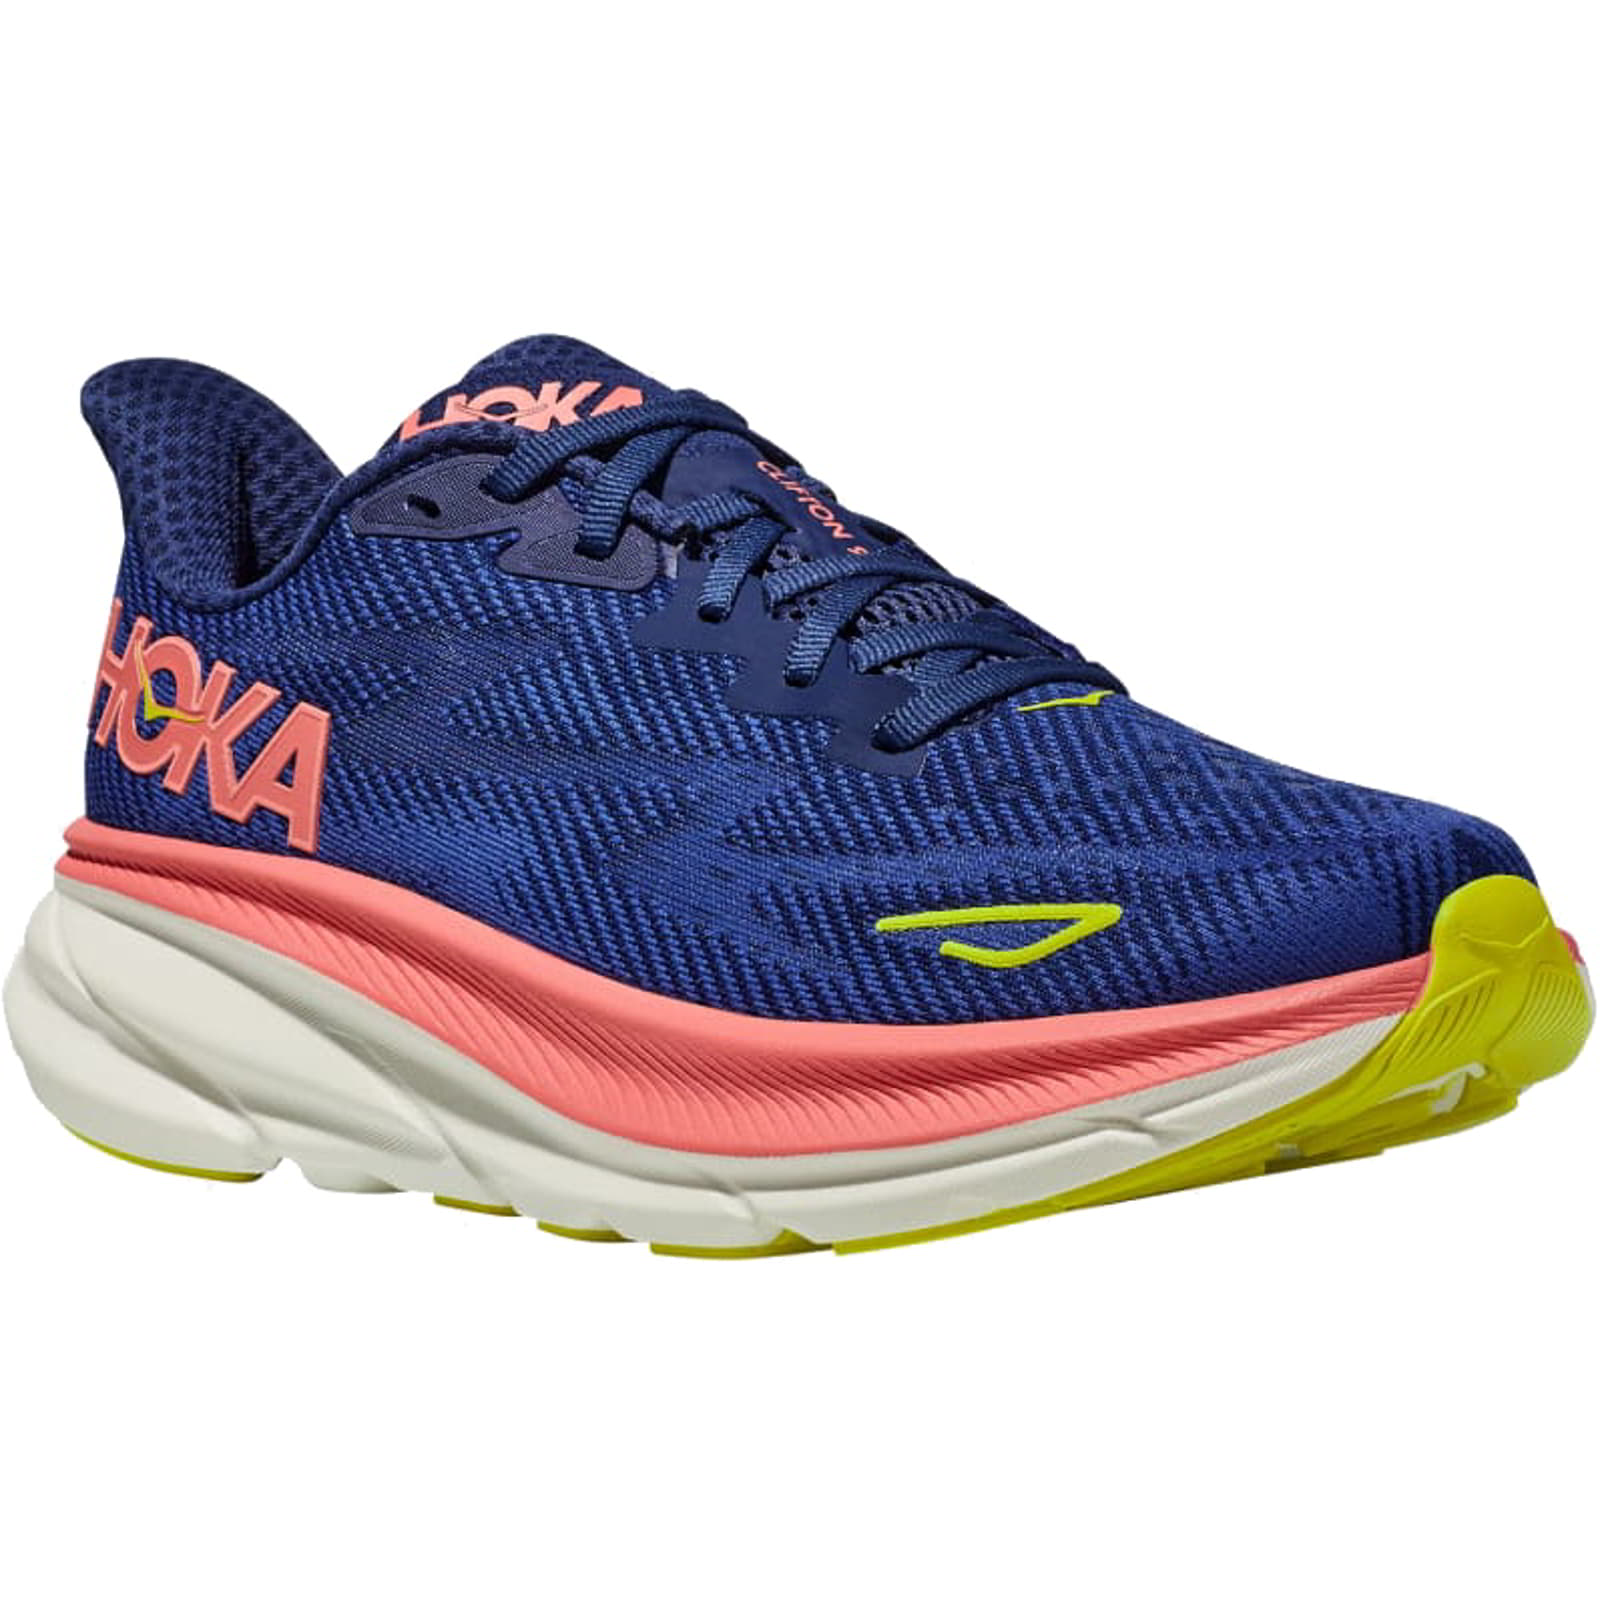 Hoka Women's Clifton 9 Lace Up Running Shoes Trainers - UK 7.5 / US 9